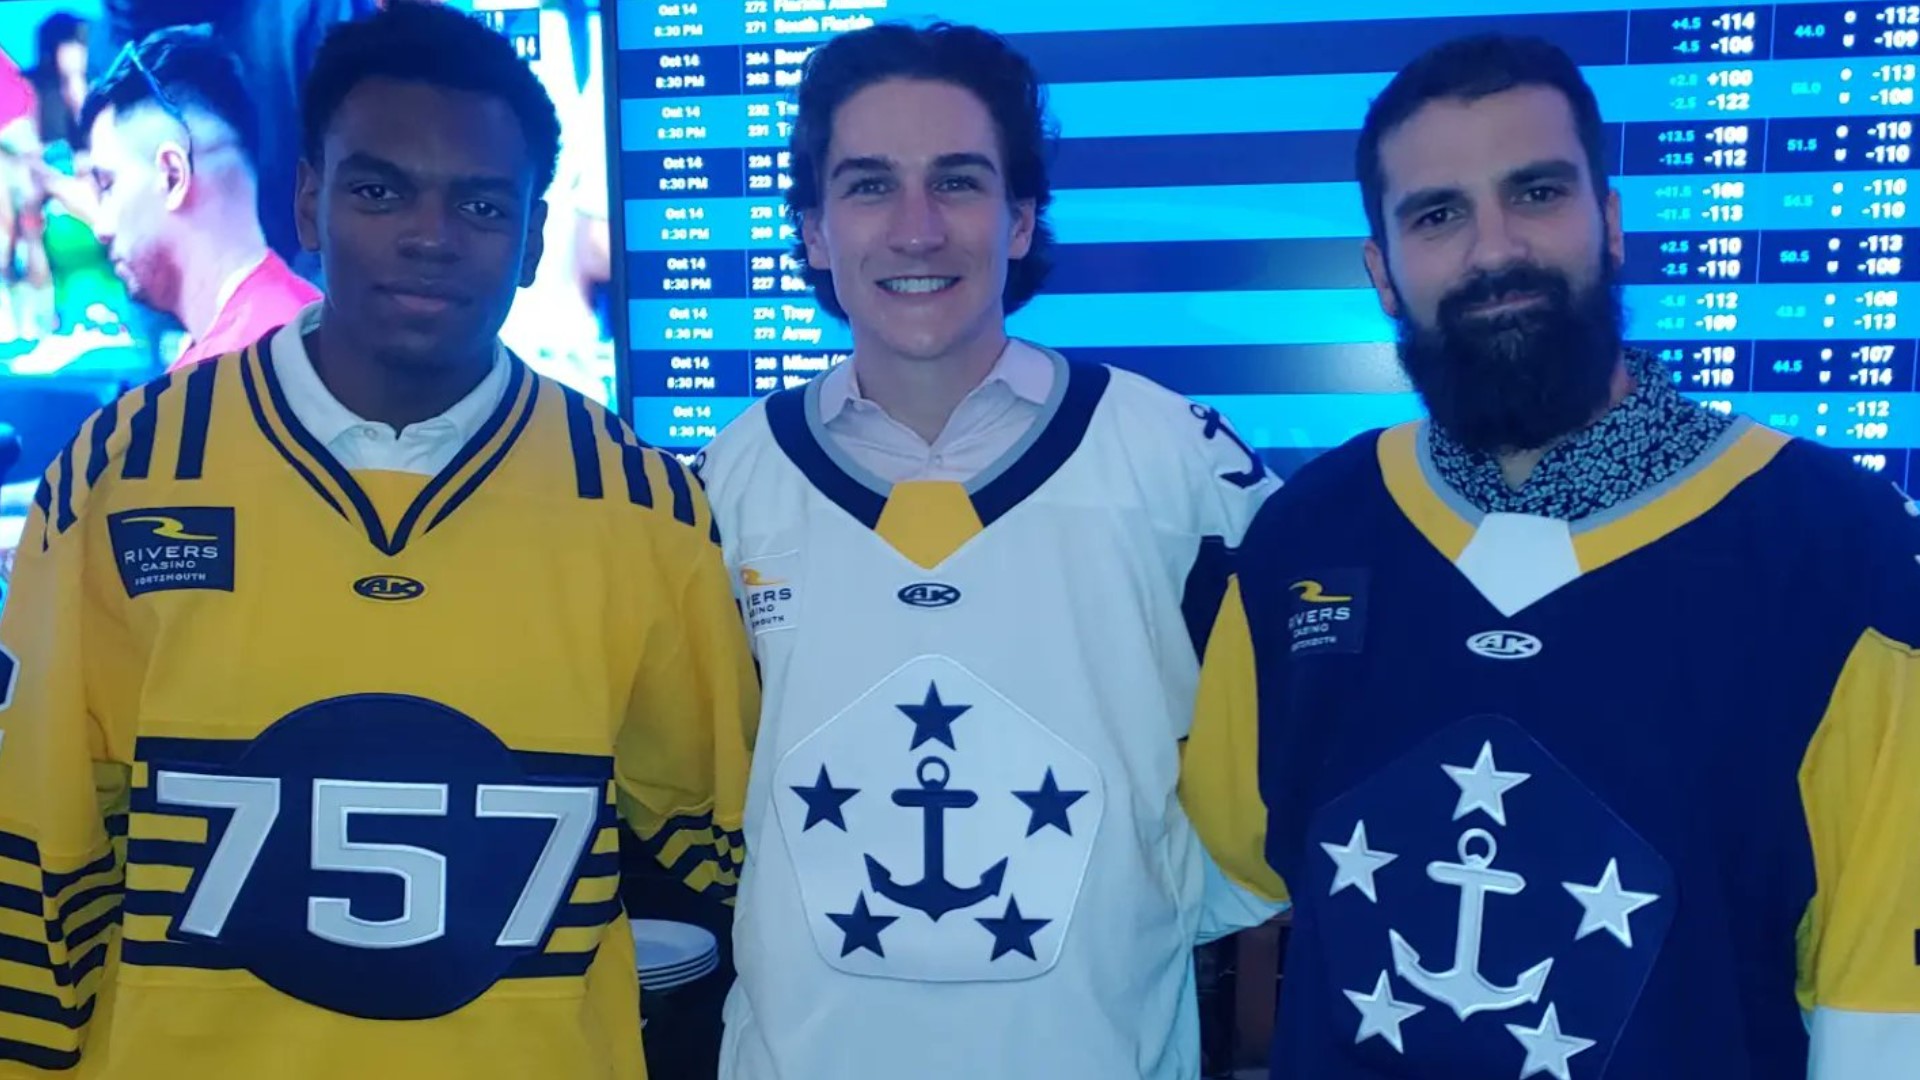 The Admirals sport new jerseys for the upcoming season.